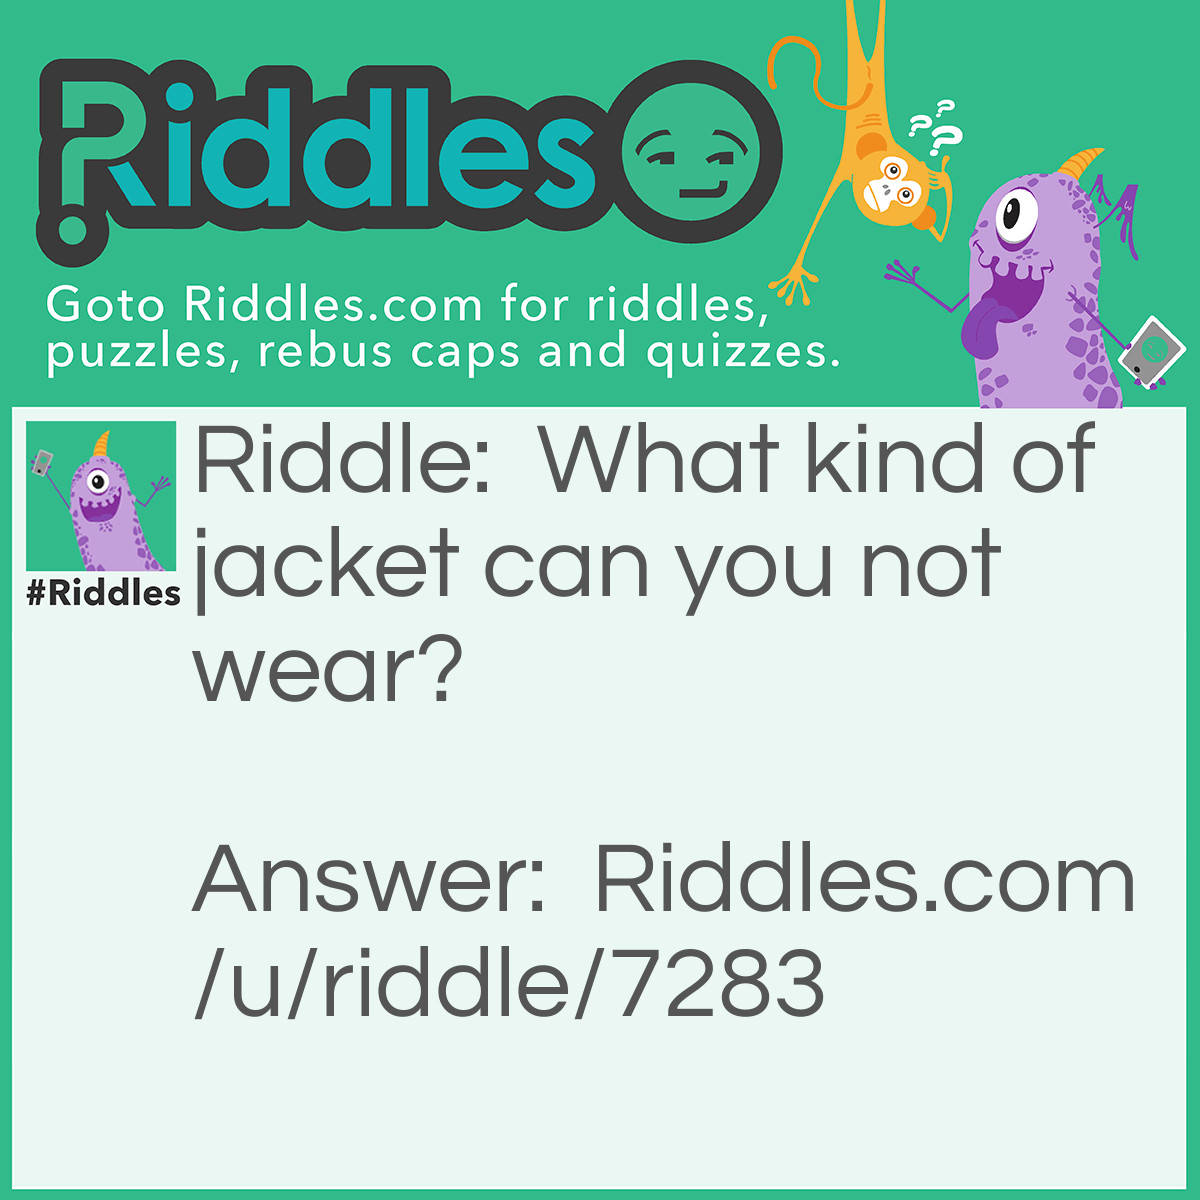 Riddle: What kind of jacket can you not wear? Answer: A Jacket Potato.